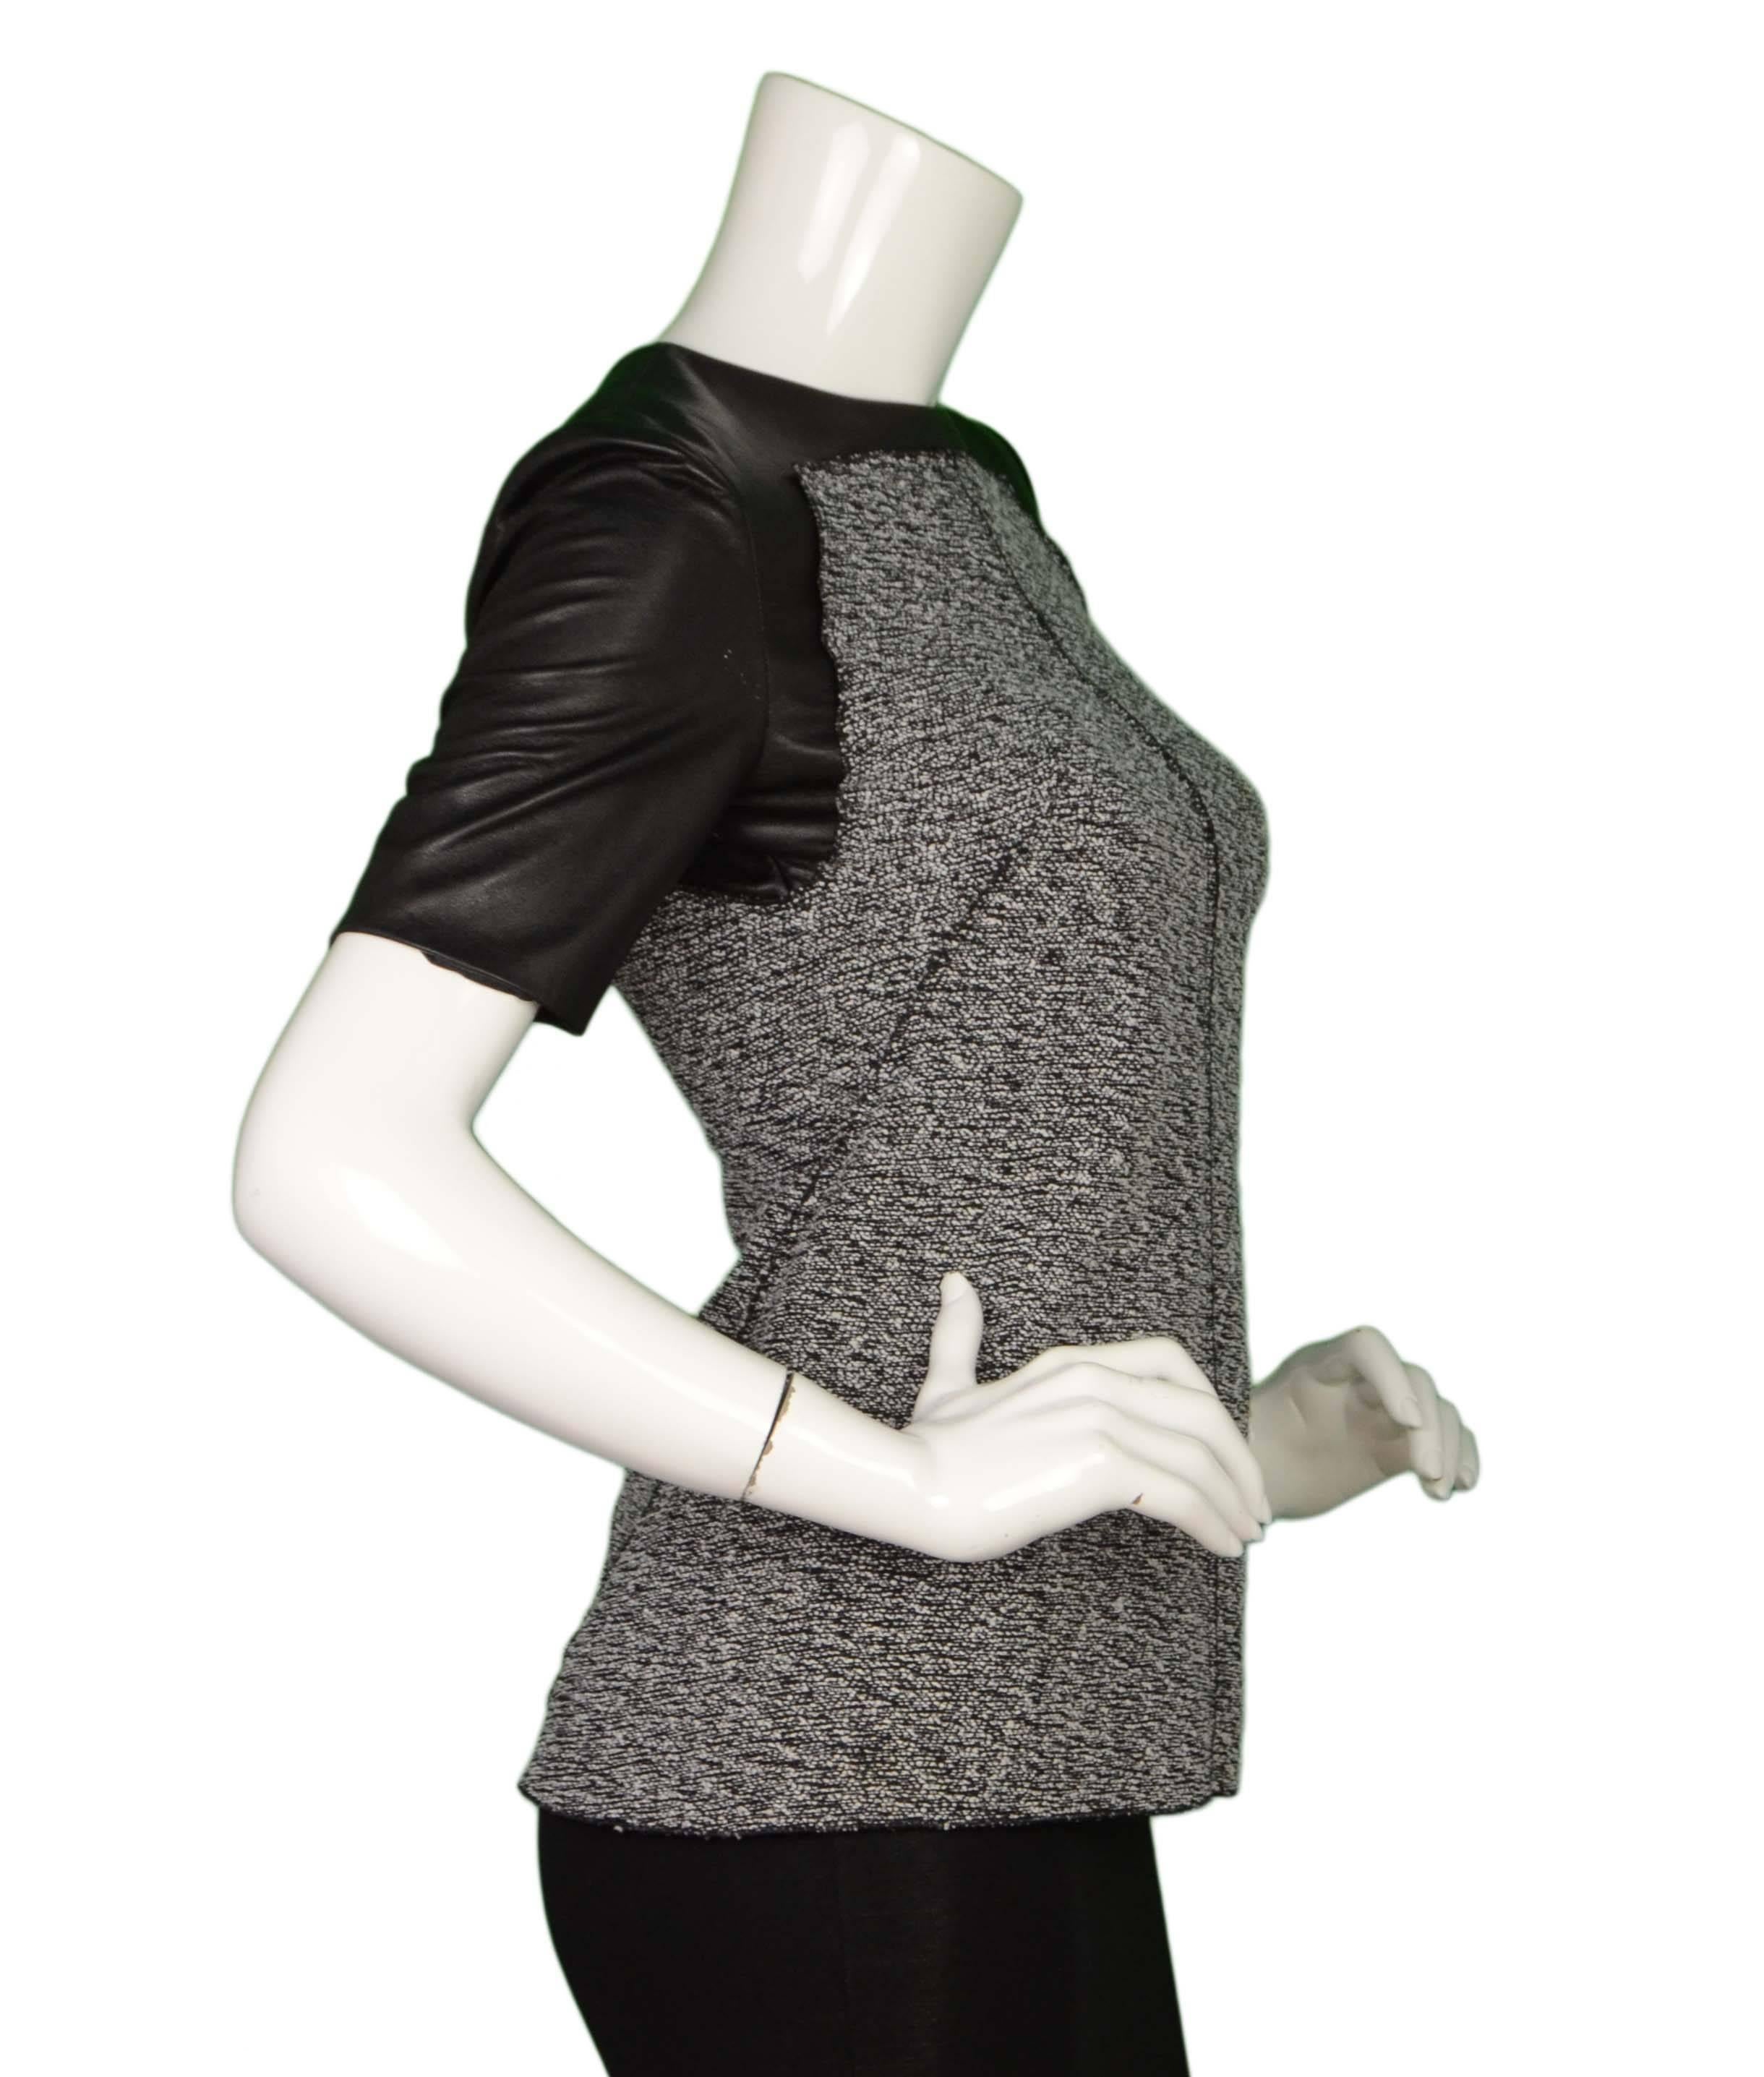 Proenza Schouler Black Leather & Tweed Short Sleeve Top 
Features black leather sleeves with black and white tweed bodice
Color: Black and white
Composition: Not given- bodice believed to be tweed-wool blend and sleeves believed to be 100%